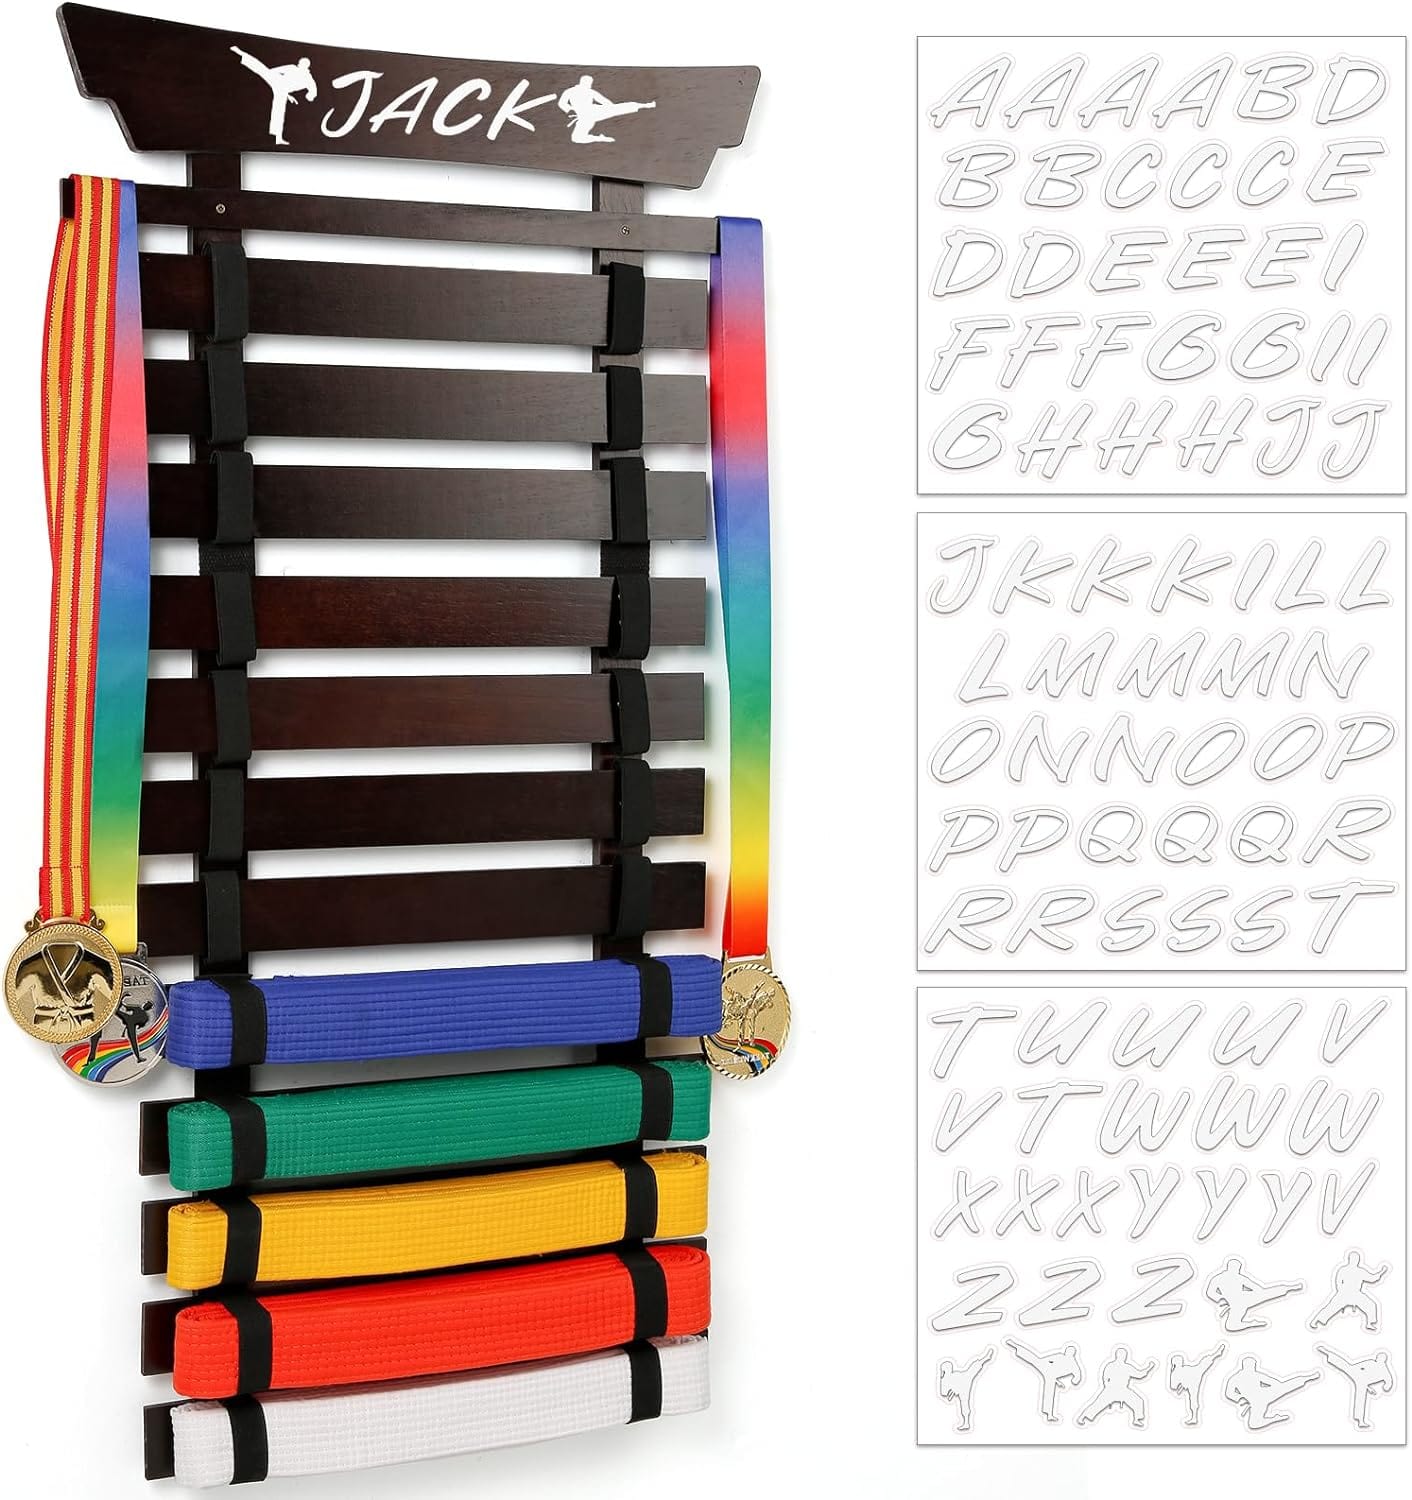 Eclipse Martial Art Supplies sporting goods Walnut 12 Belts Karate Belt Display Rack with Stickers, Martial Arts Belt Display Holder, Taekwondo Belt Jiu Jitsu Belt BJJ Belt Display Hanging Holder for Kids and Adults Gifts